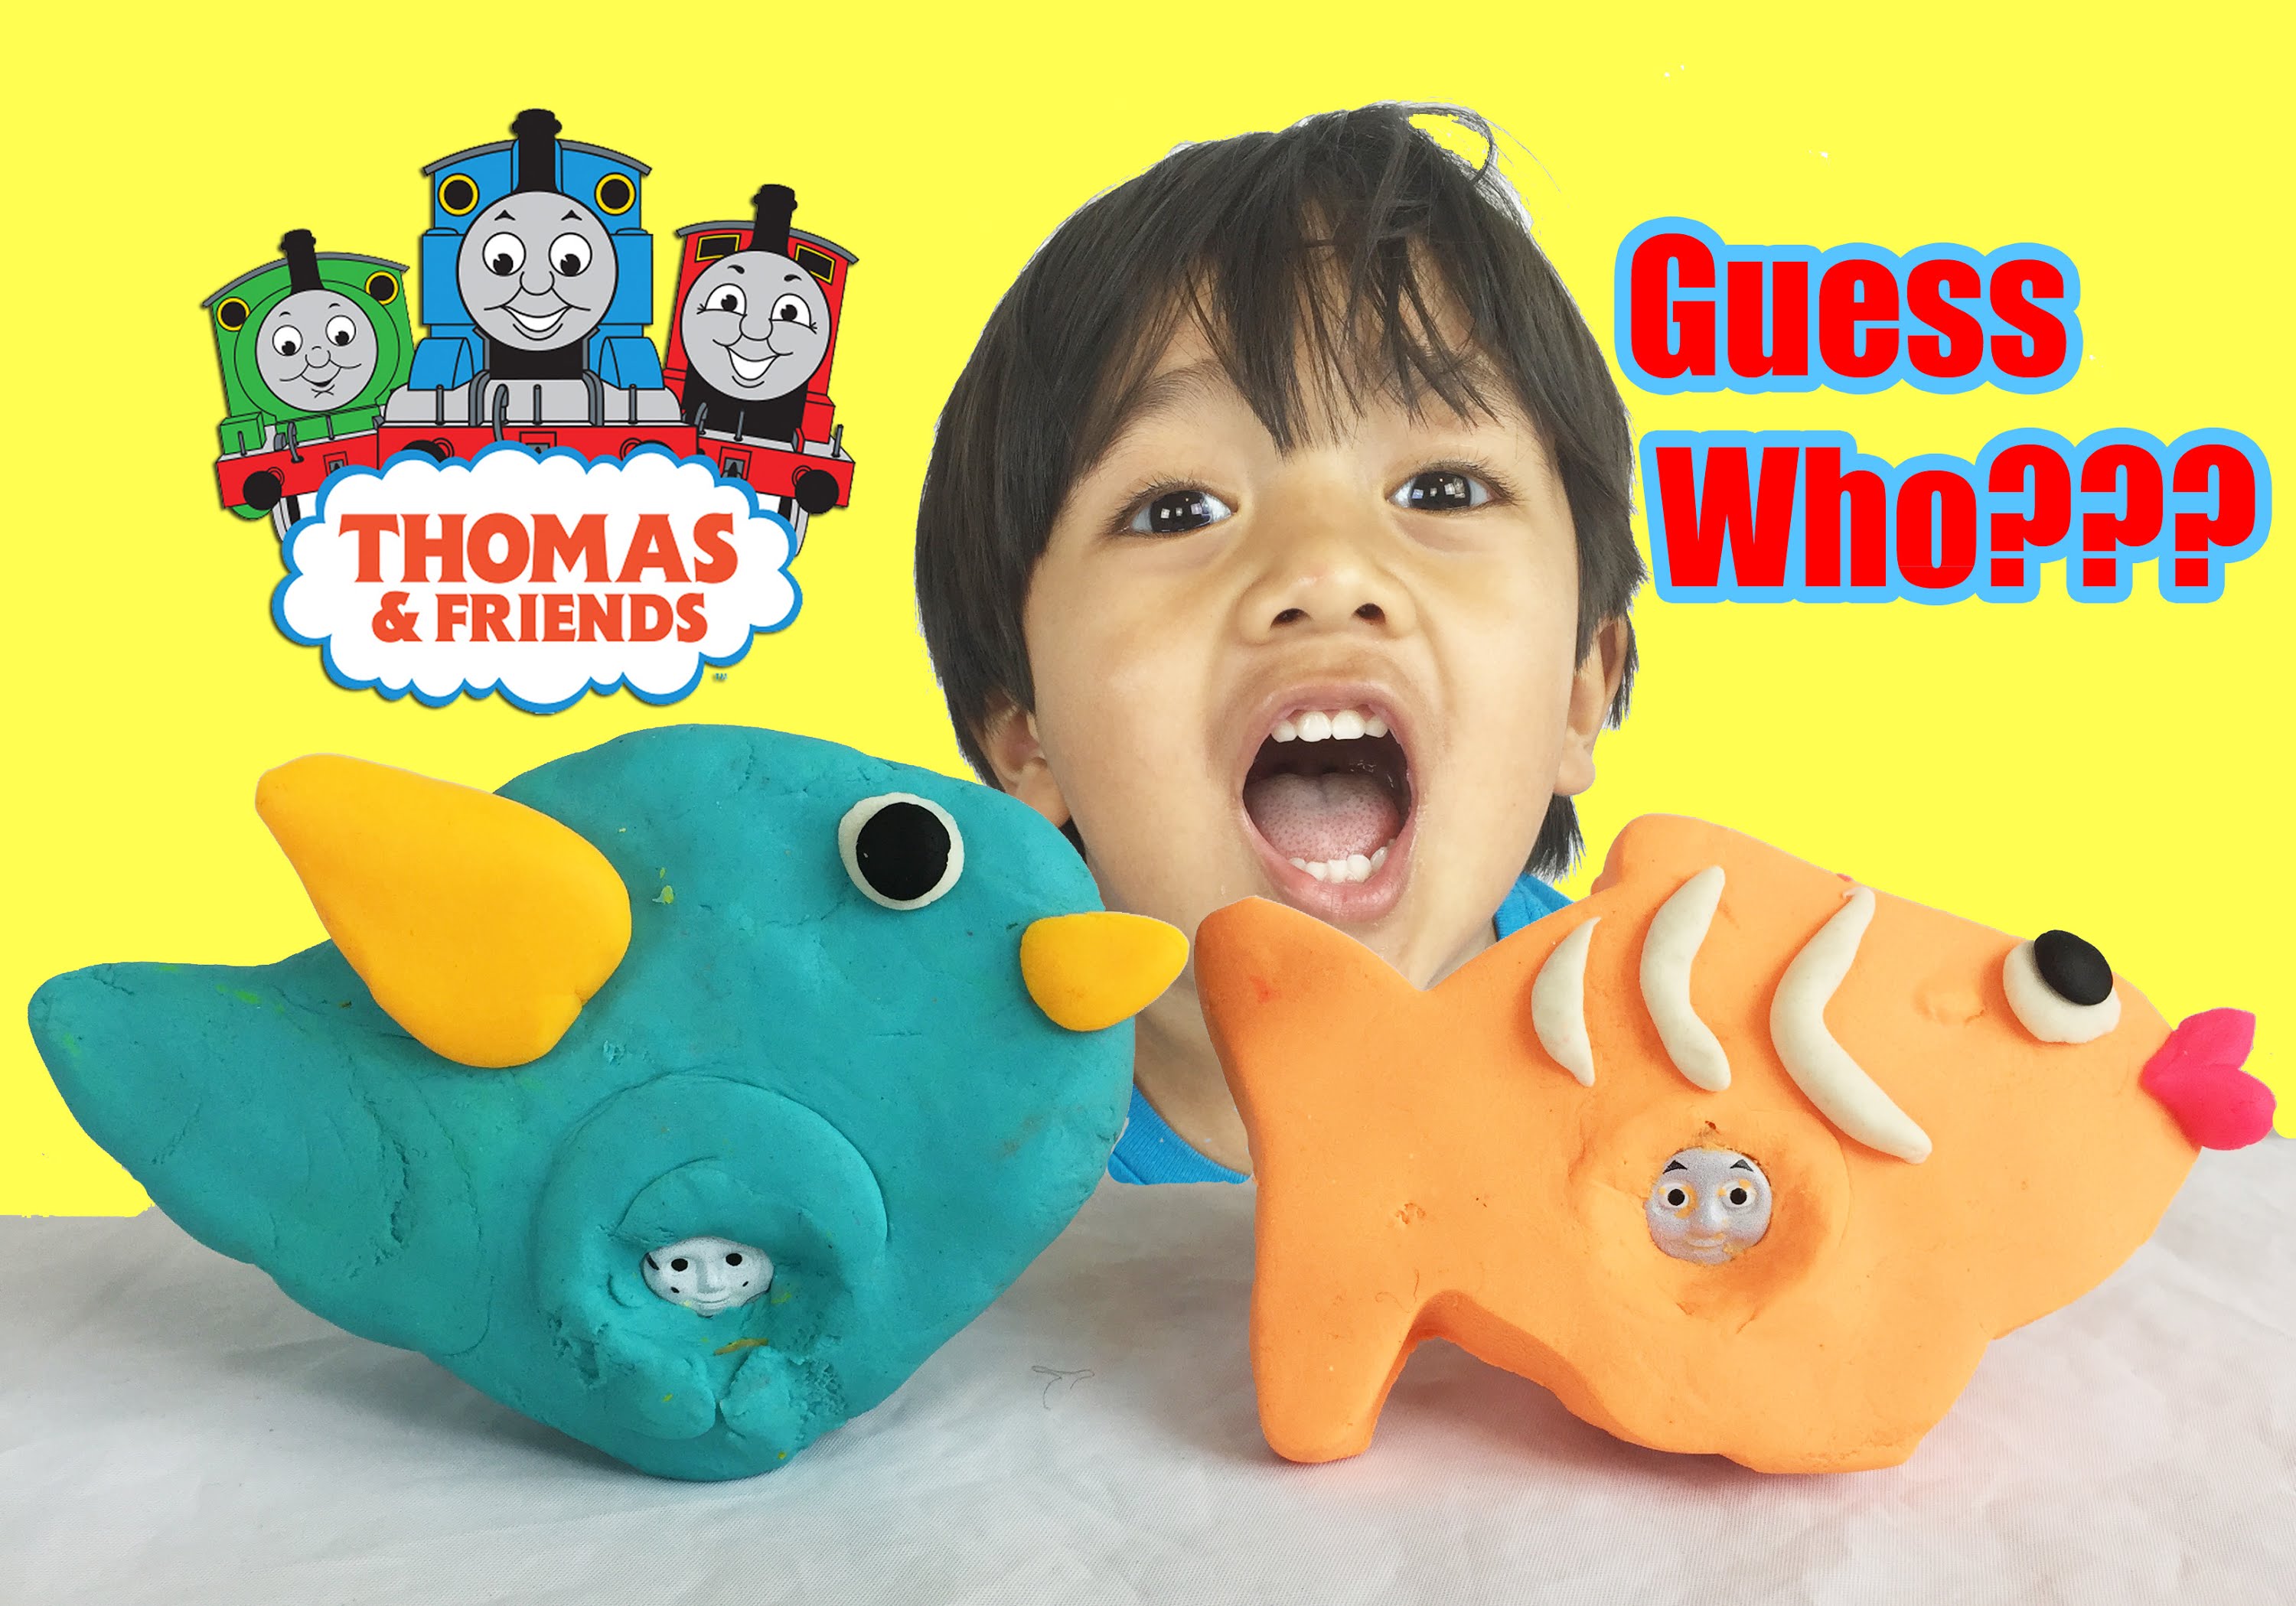 Ryan plays with PLAY DOH THOMAS & FRIENDS GUESSING GAME! - YouTube